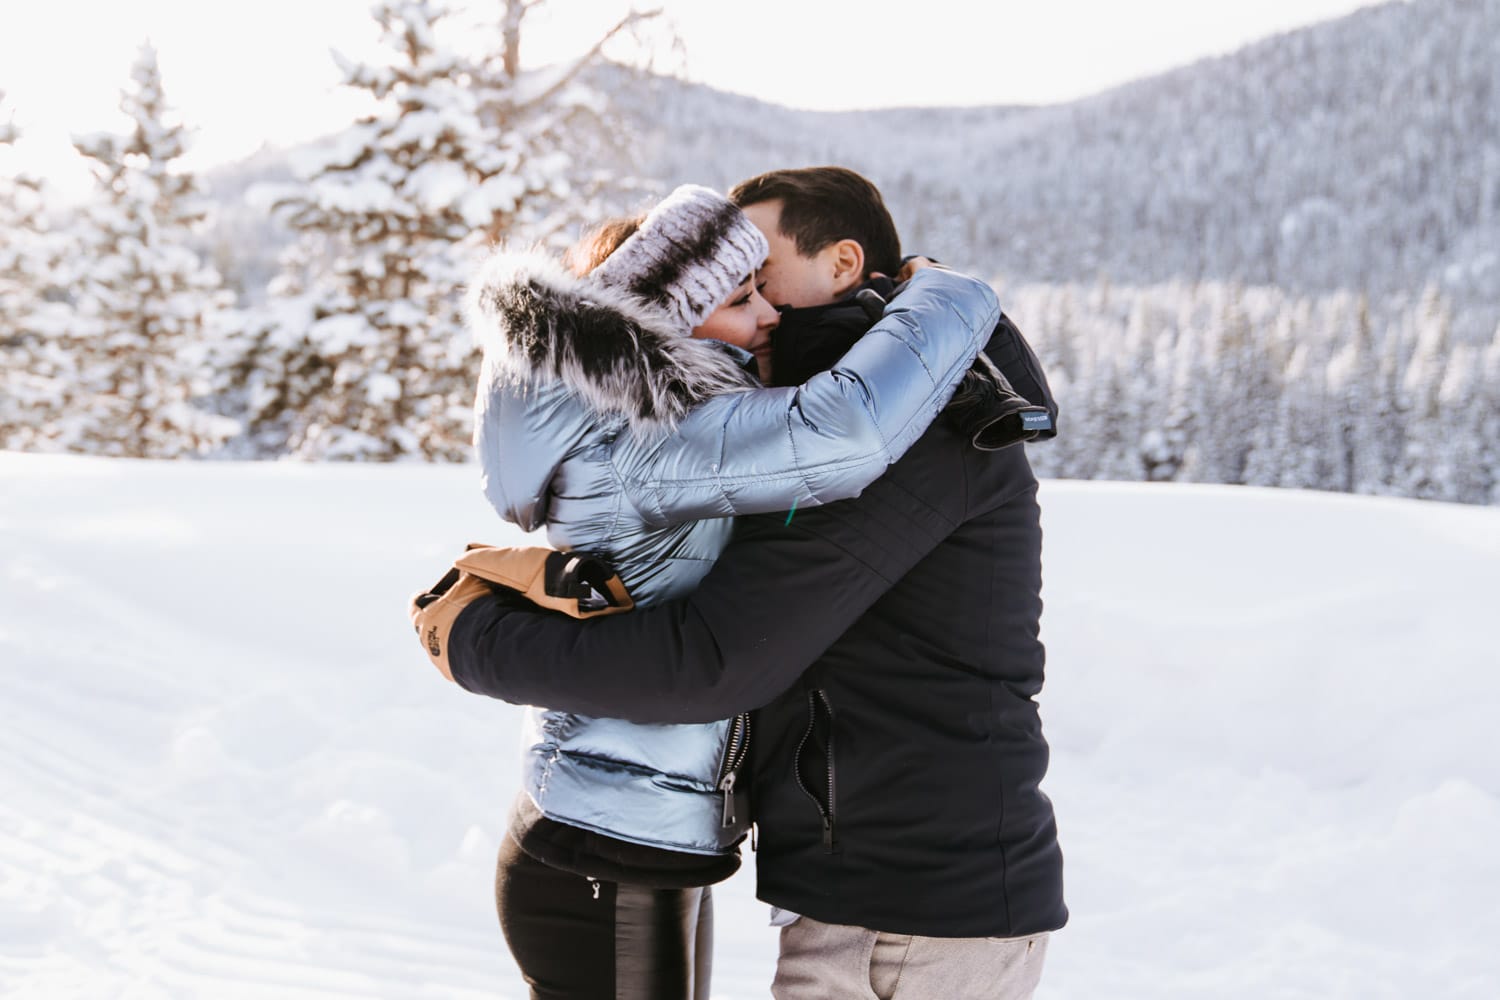 Emotional moment where Julio and Fernanda hug each other after just becoming engaged for this sleigh ride proposal in Breckenridge